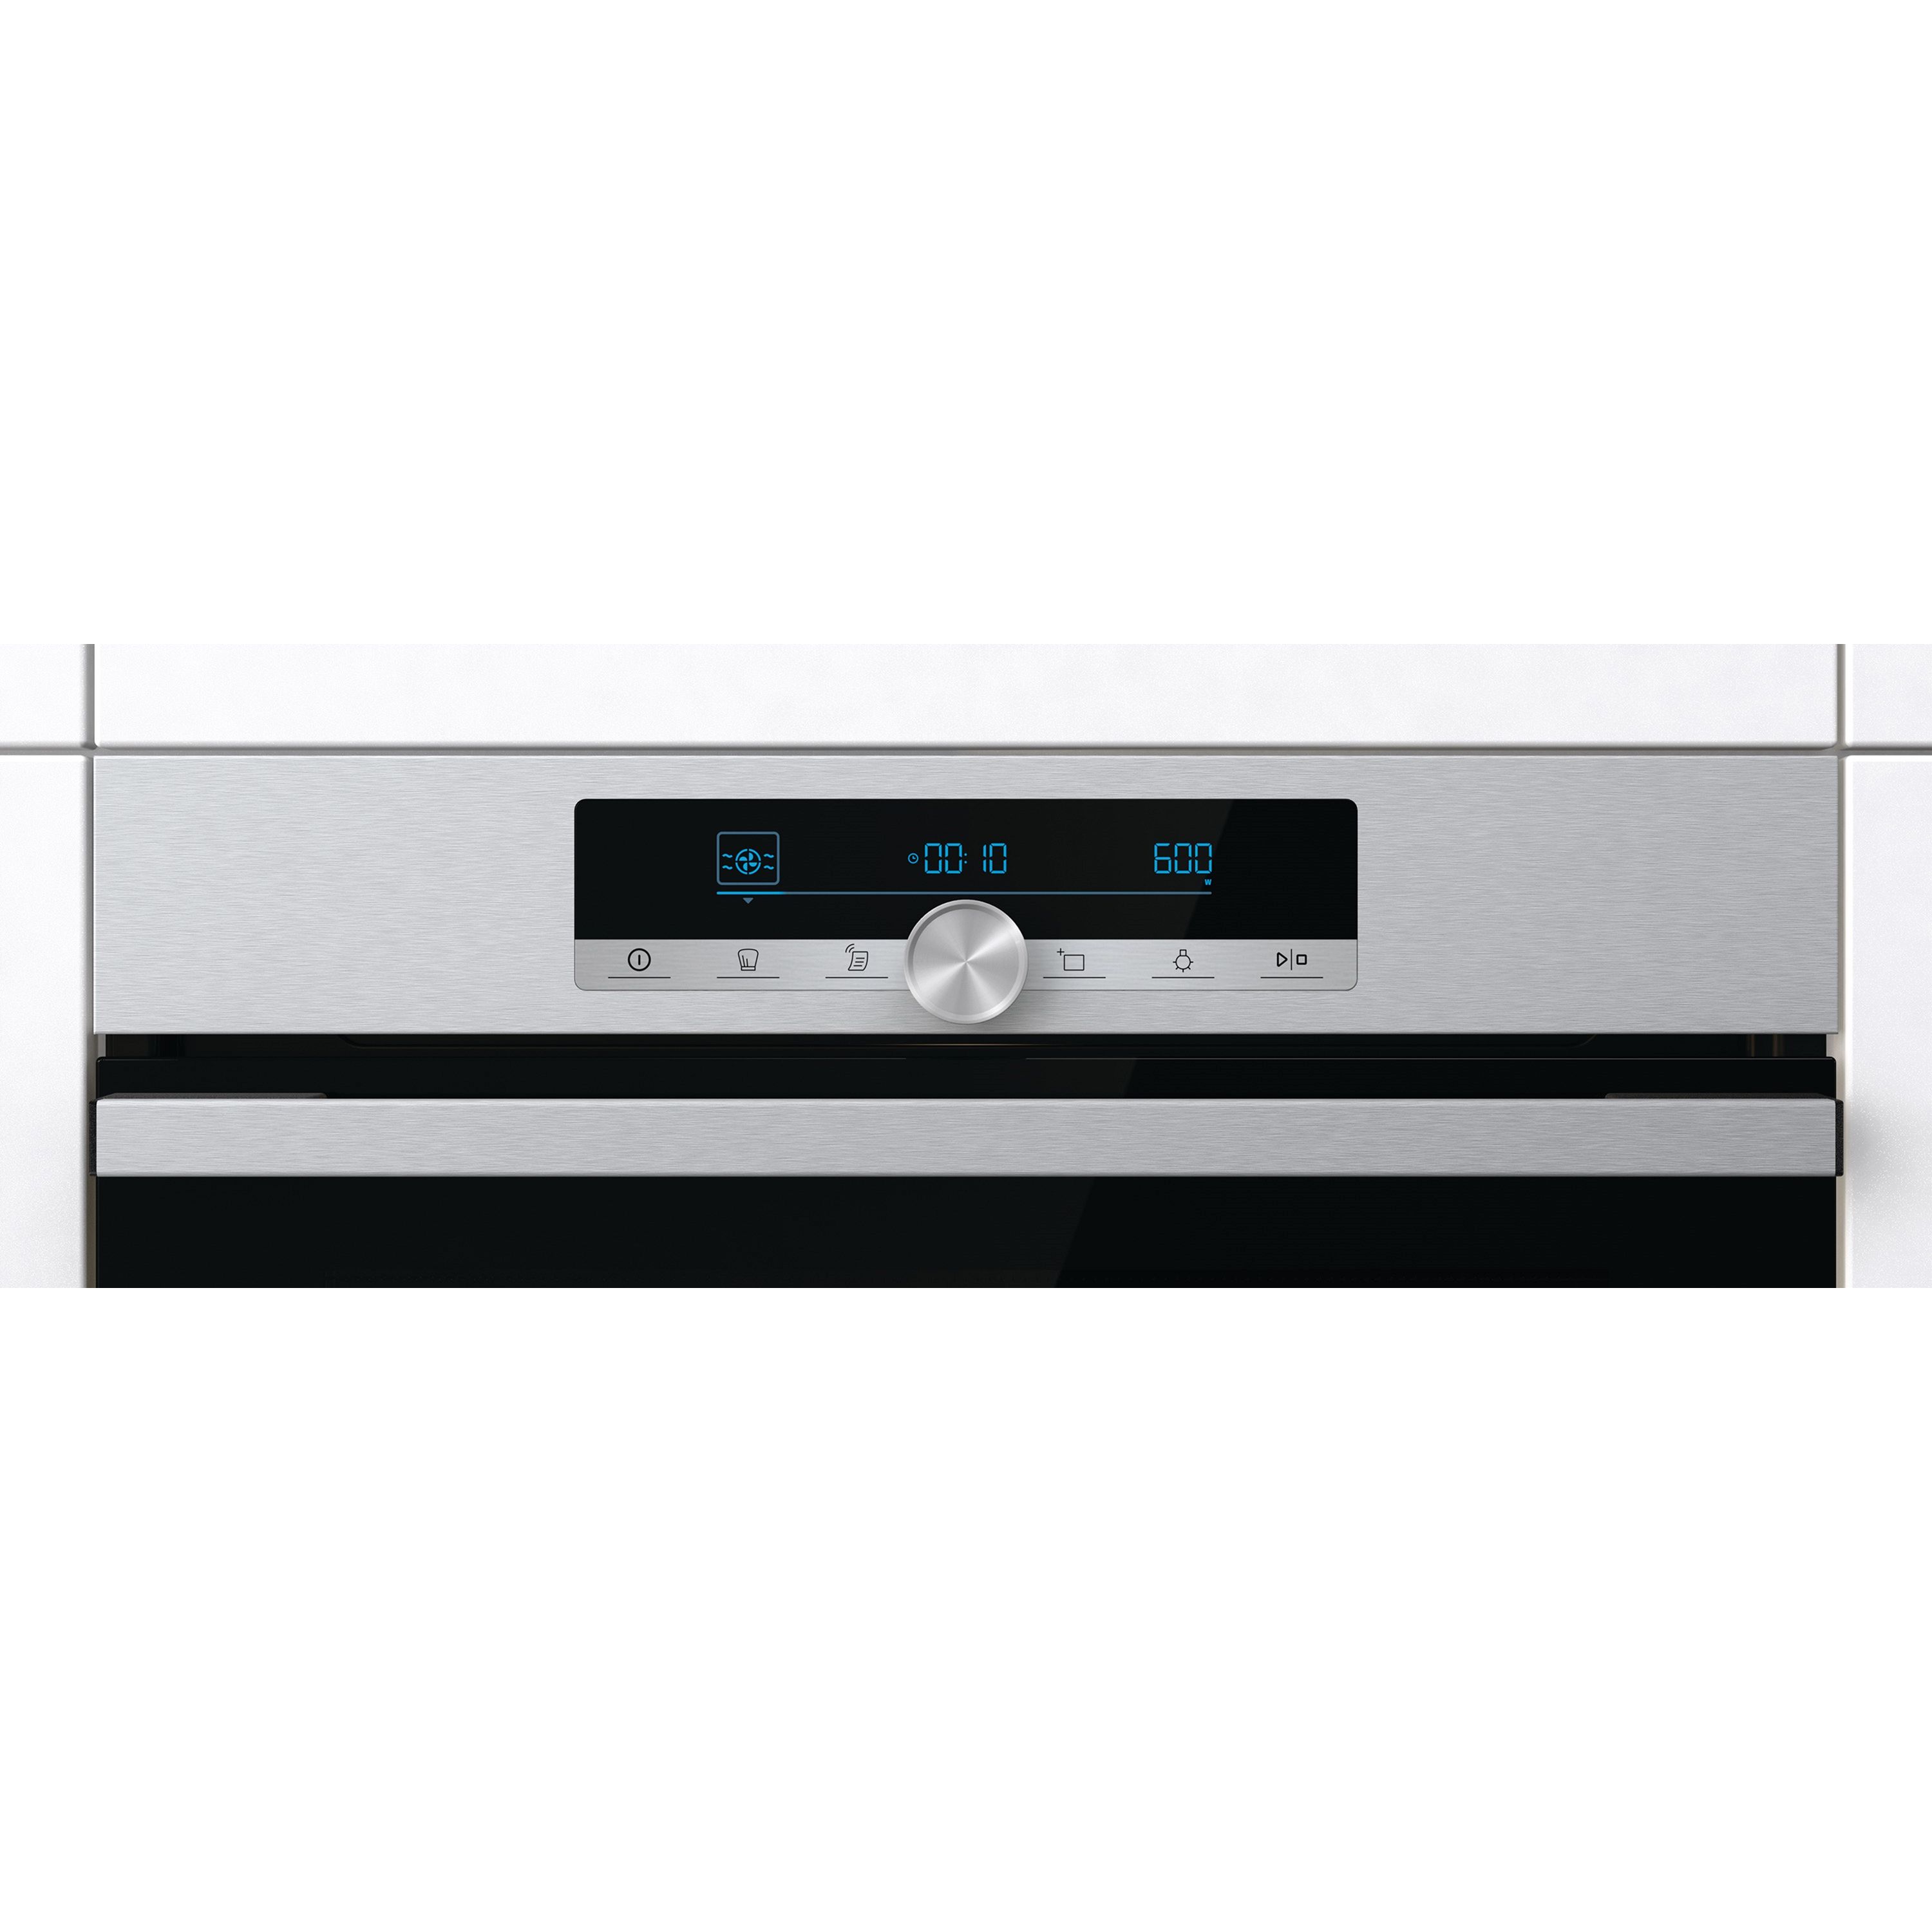 Hisense BIM44321AX Built-in Single Oven with microwave - Stainless steel